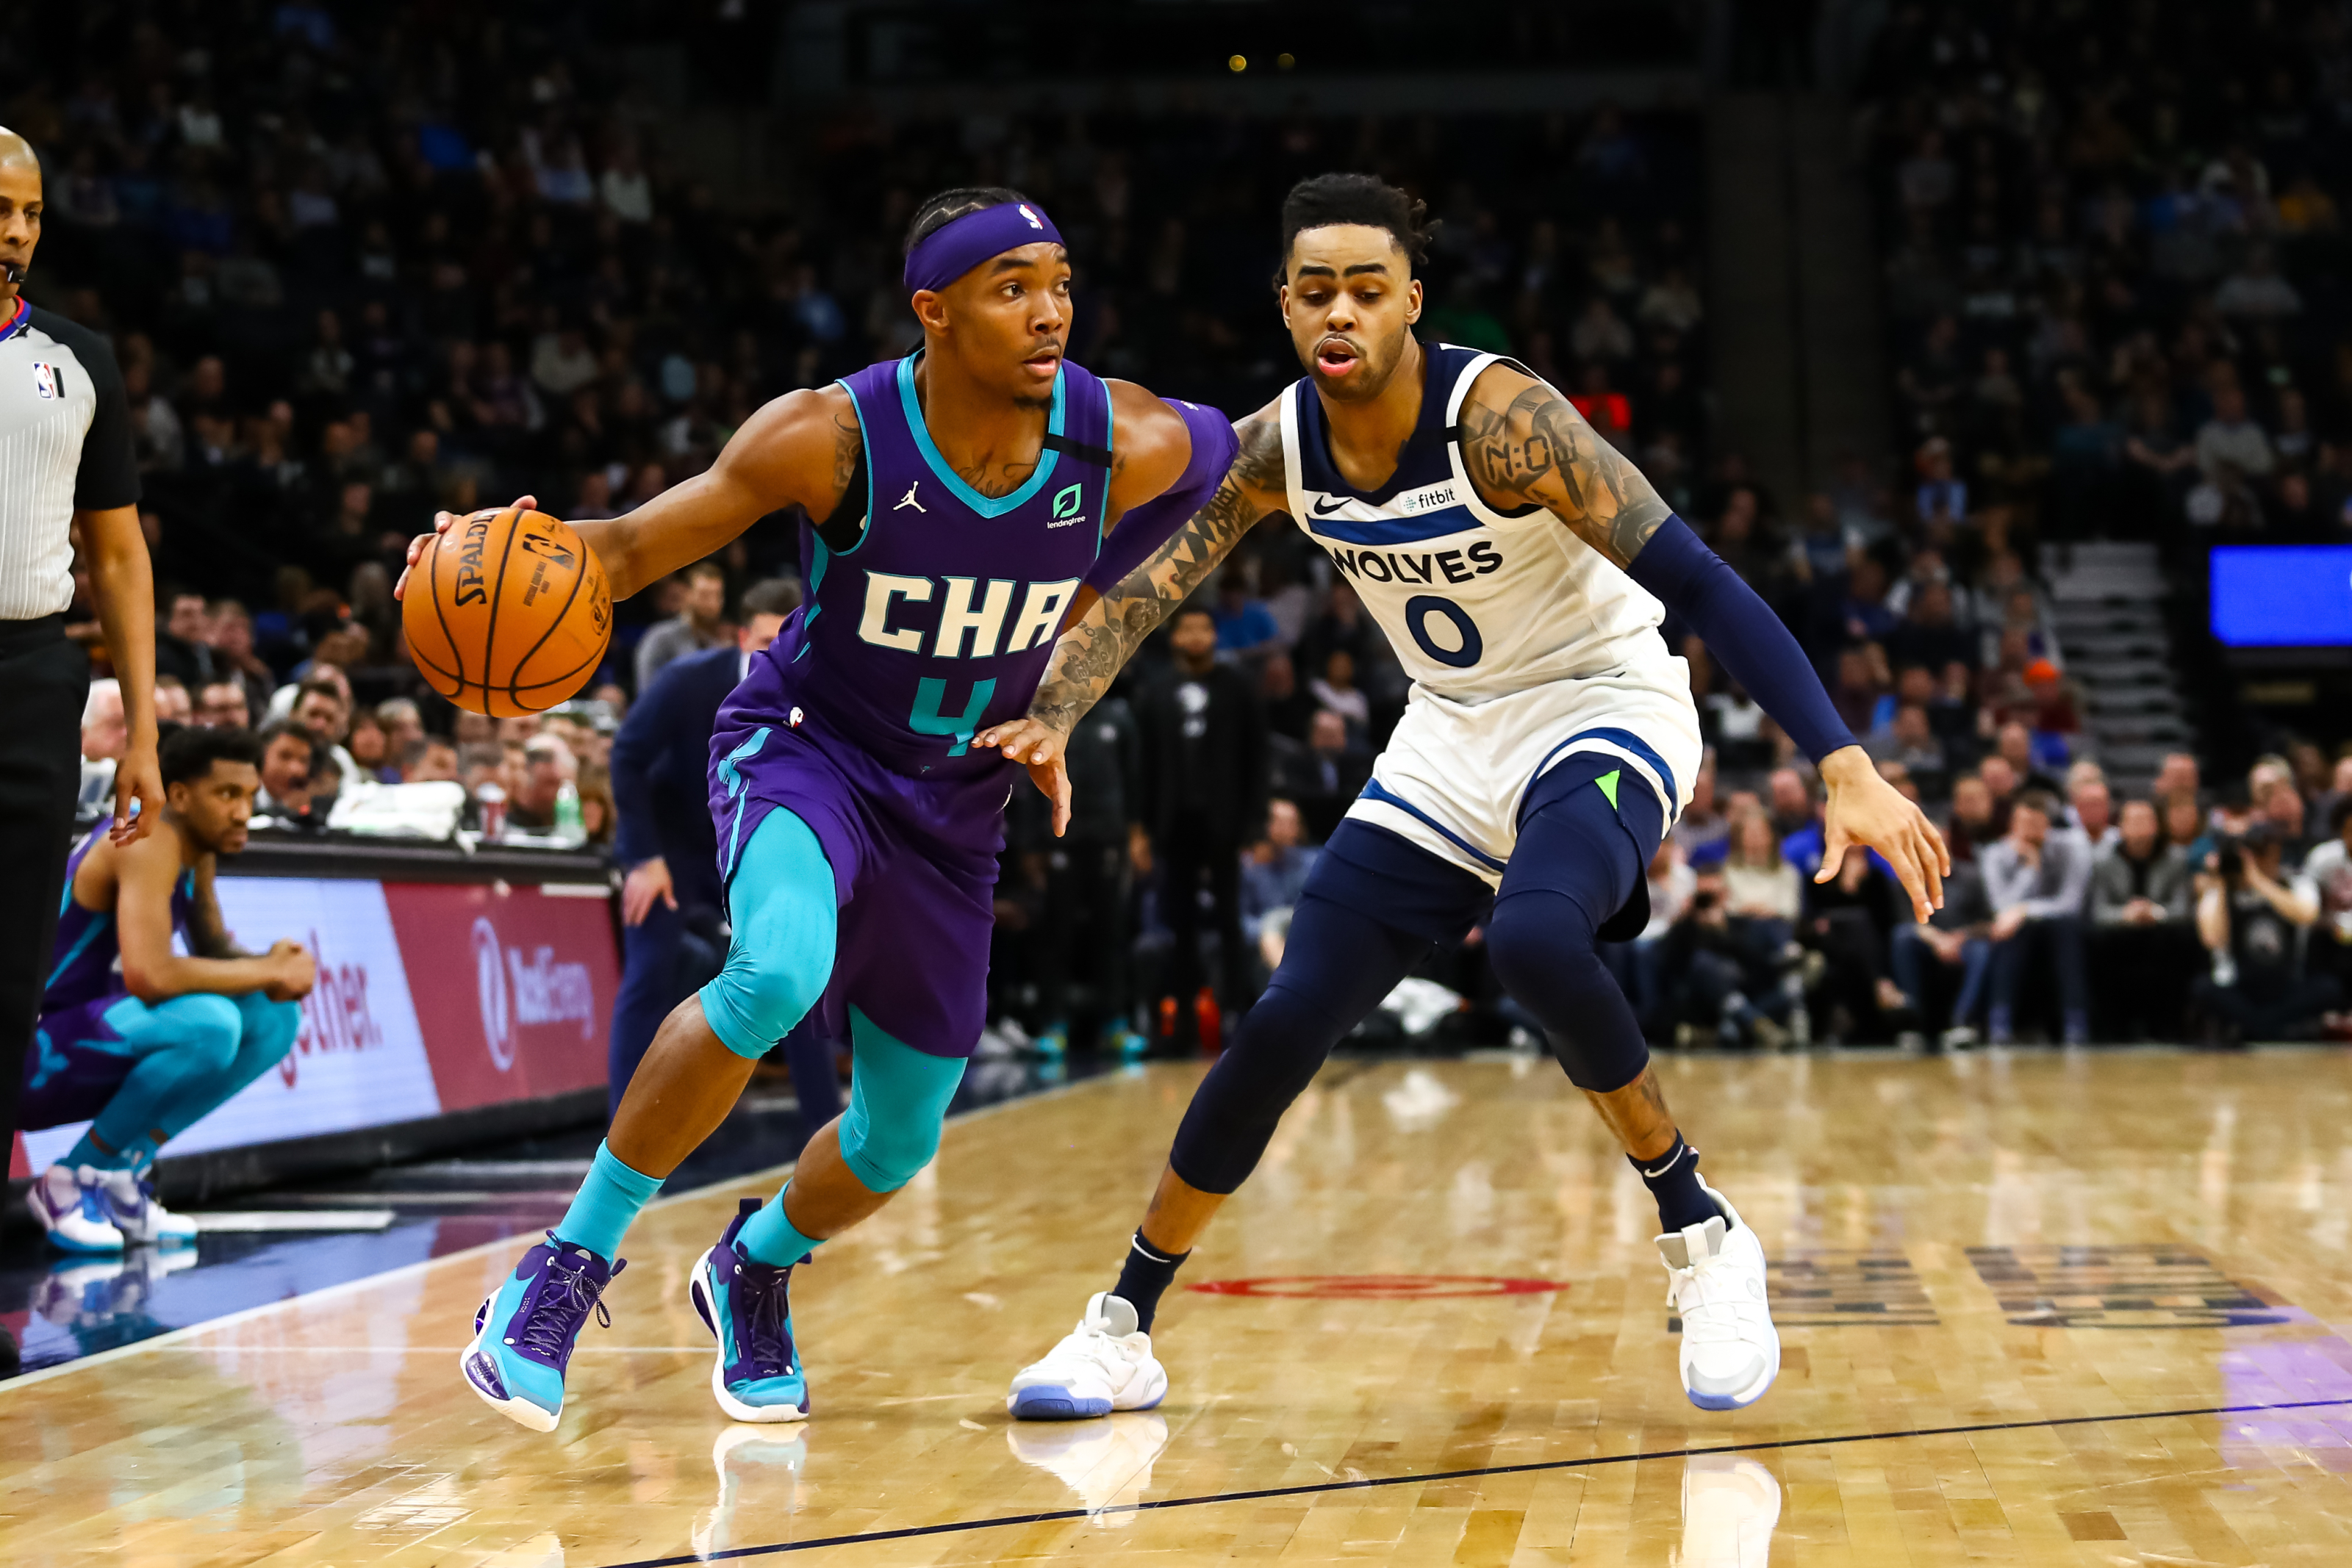 Timberwolves return to action after All-Star break at home vs. Hornets